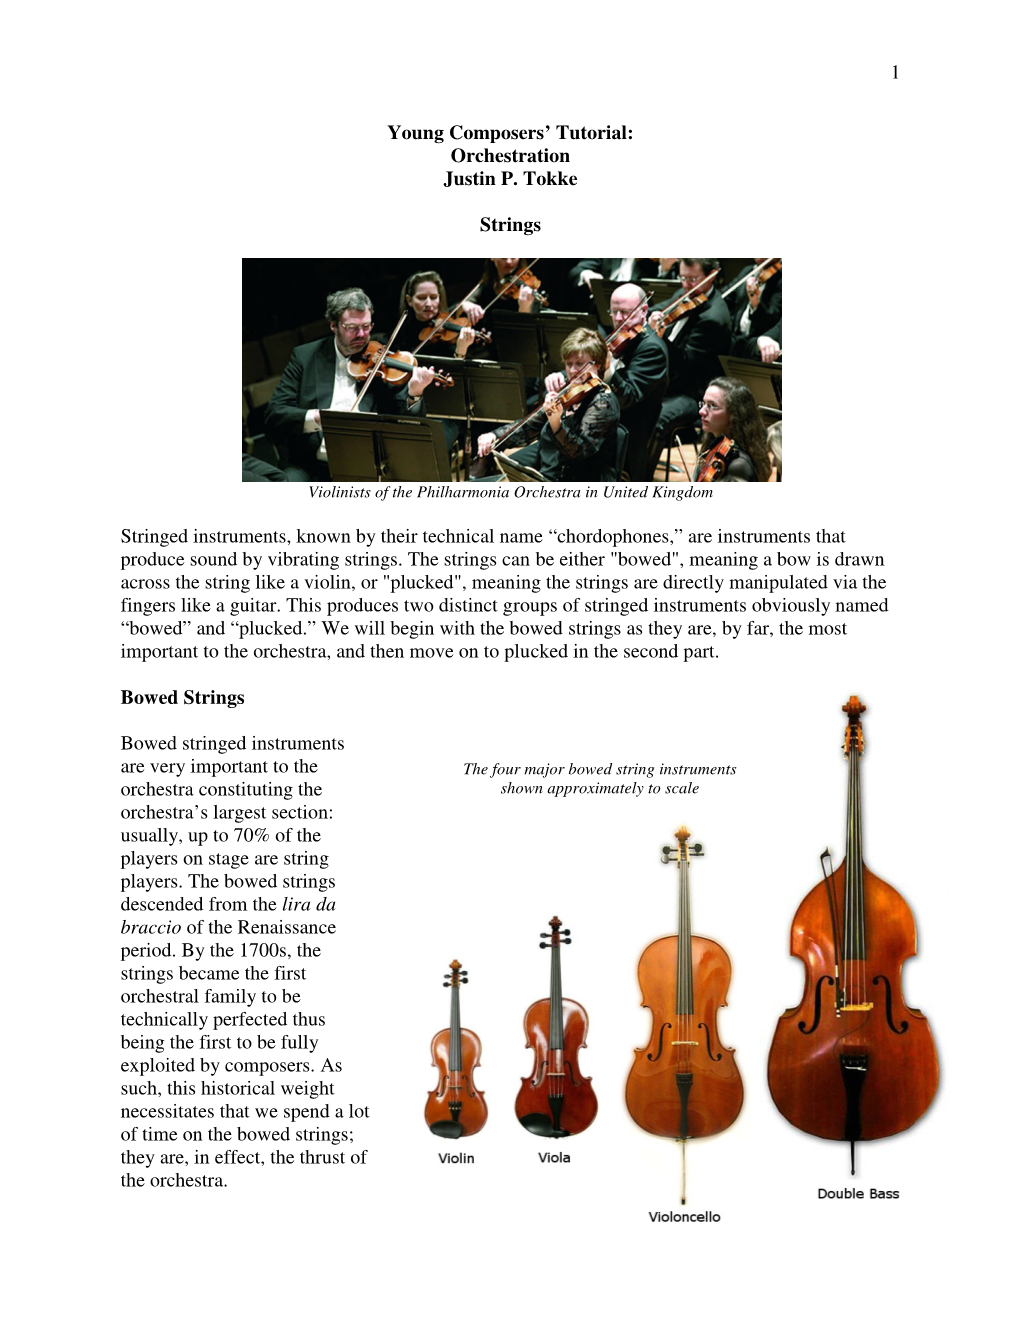 Orchestration Justin P. Tokke Strings Stringed Instruments, Known By